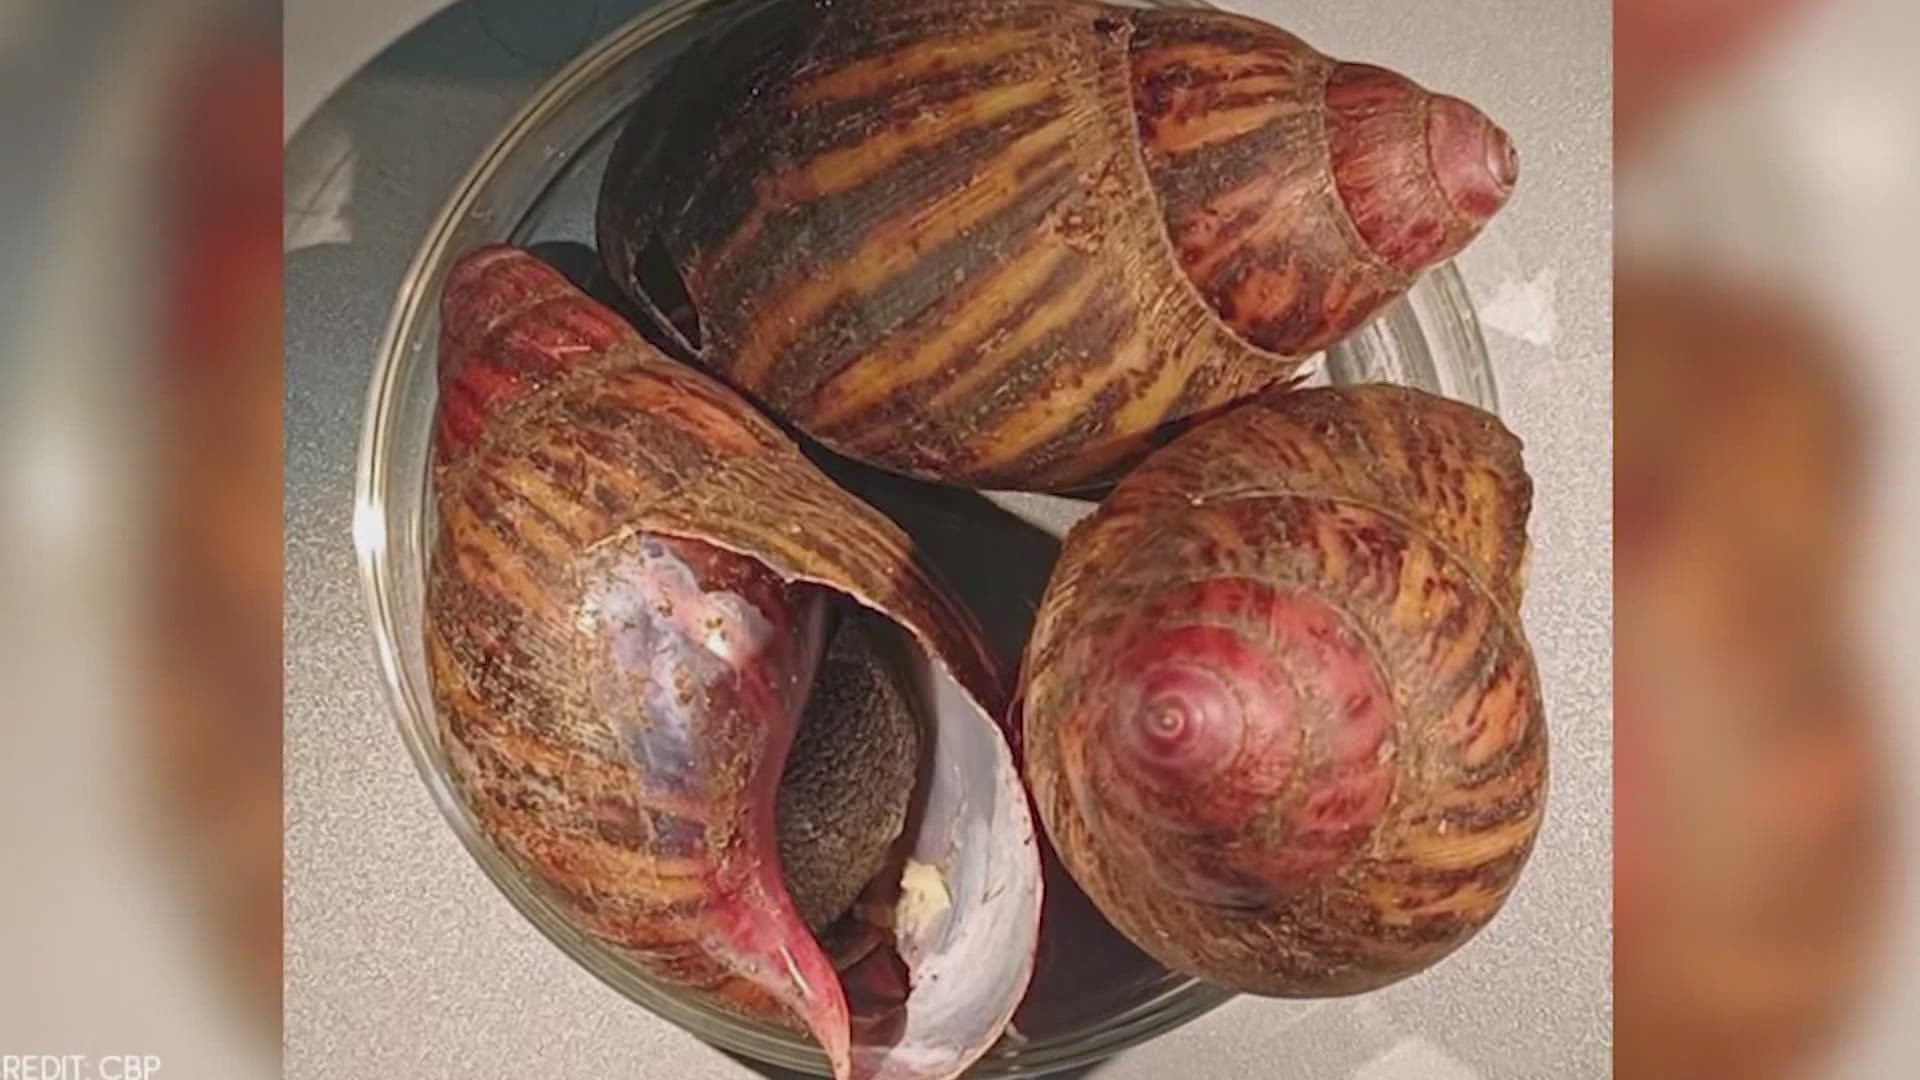 The critters, also known as banana rasp snails, are considered invasive species.